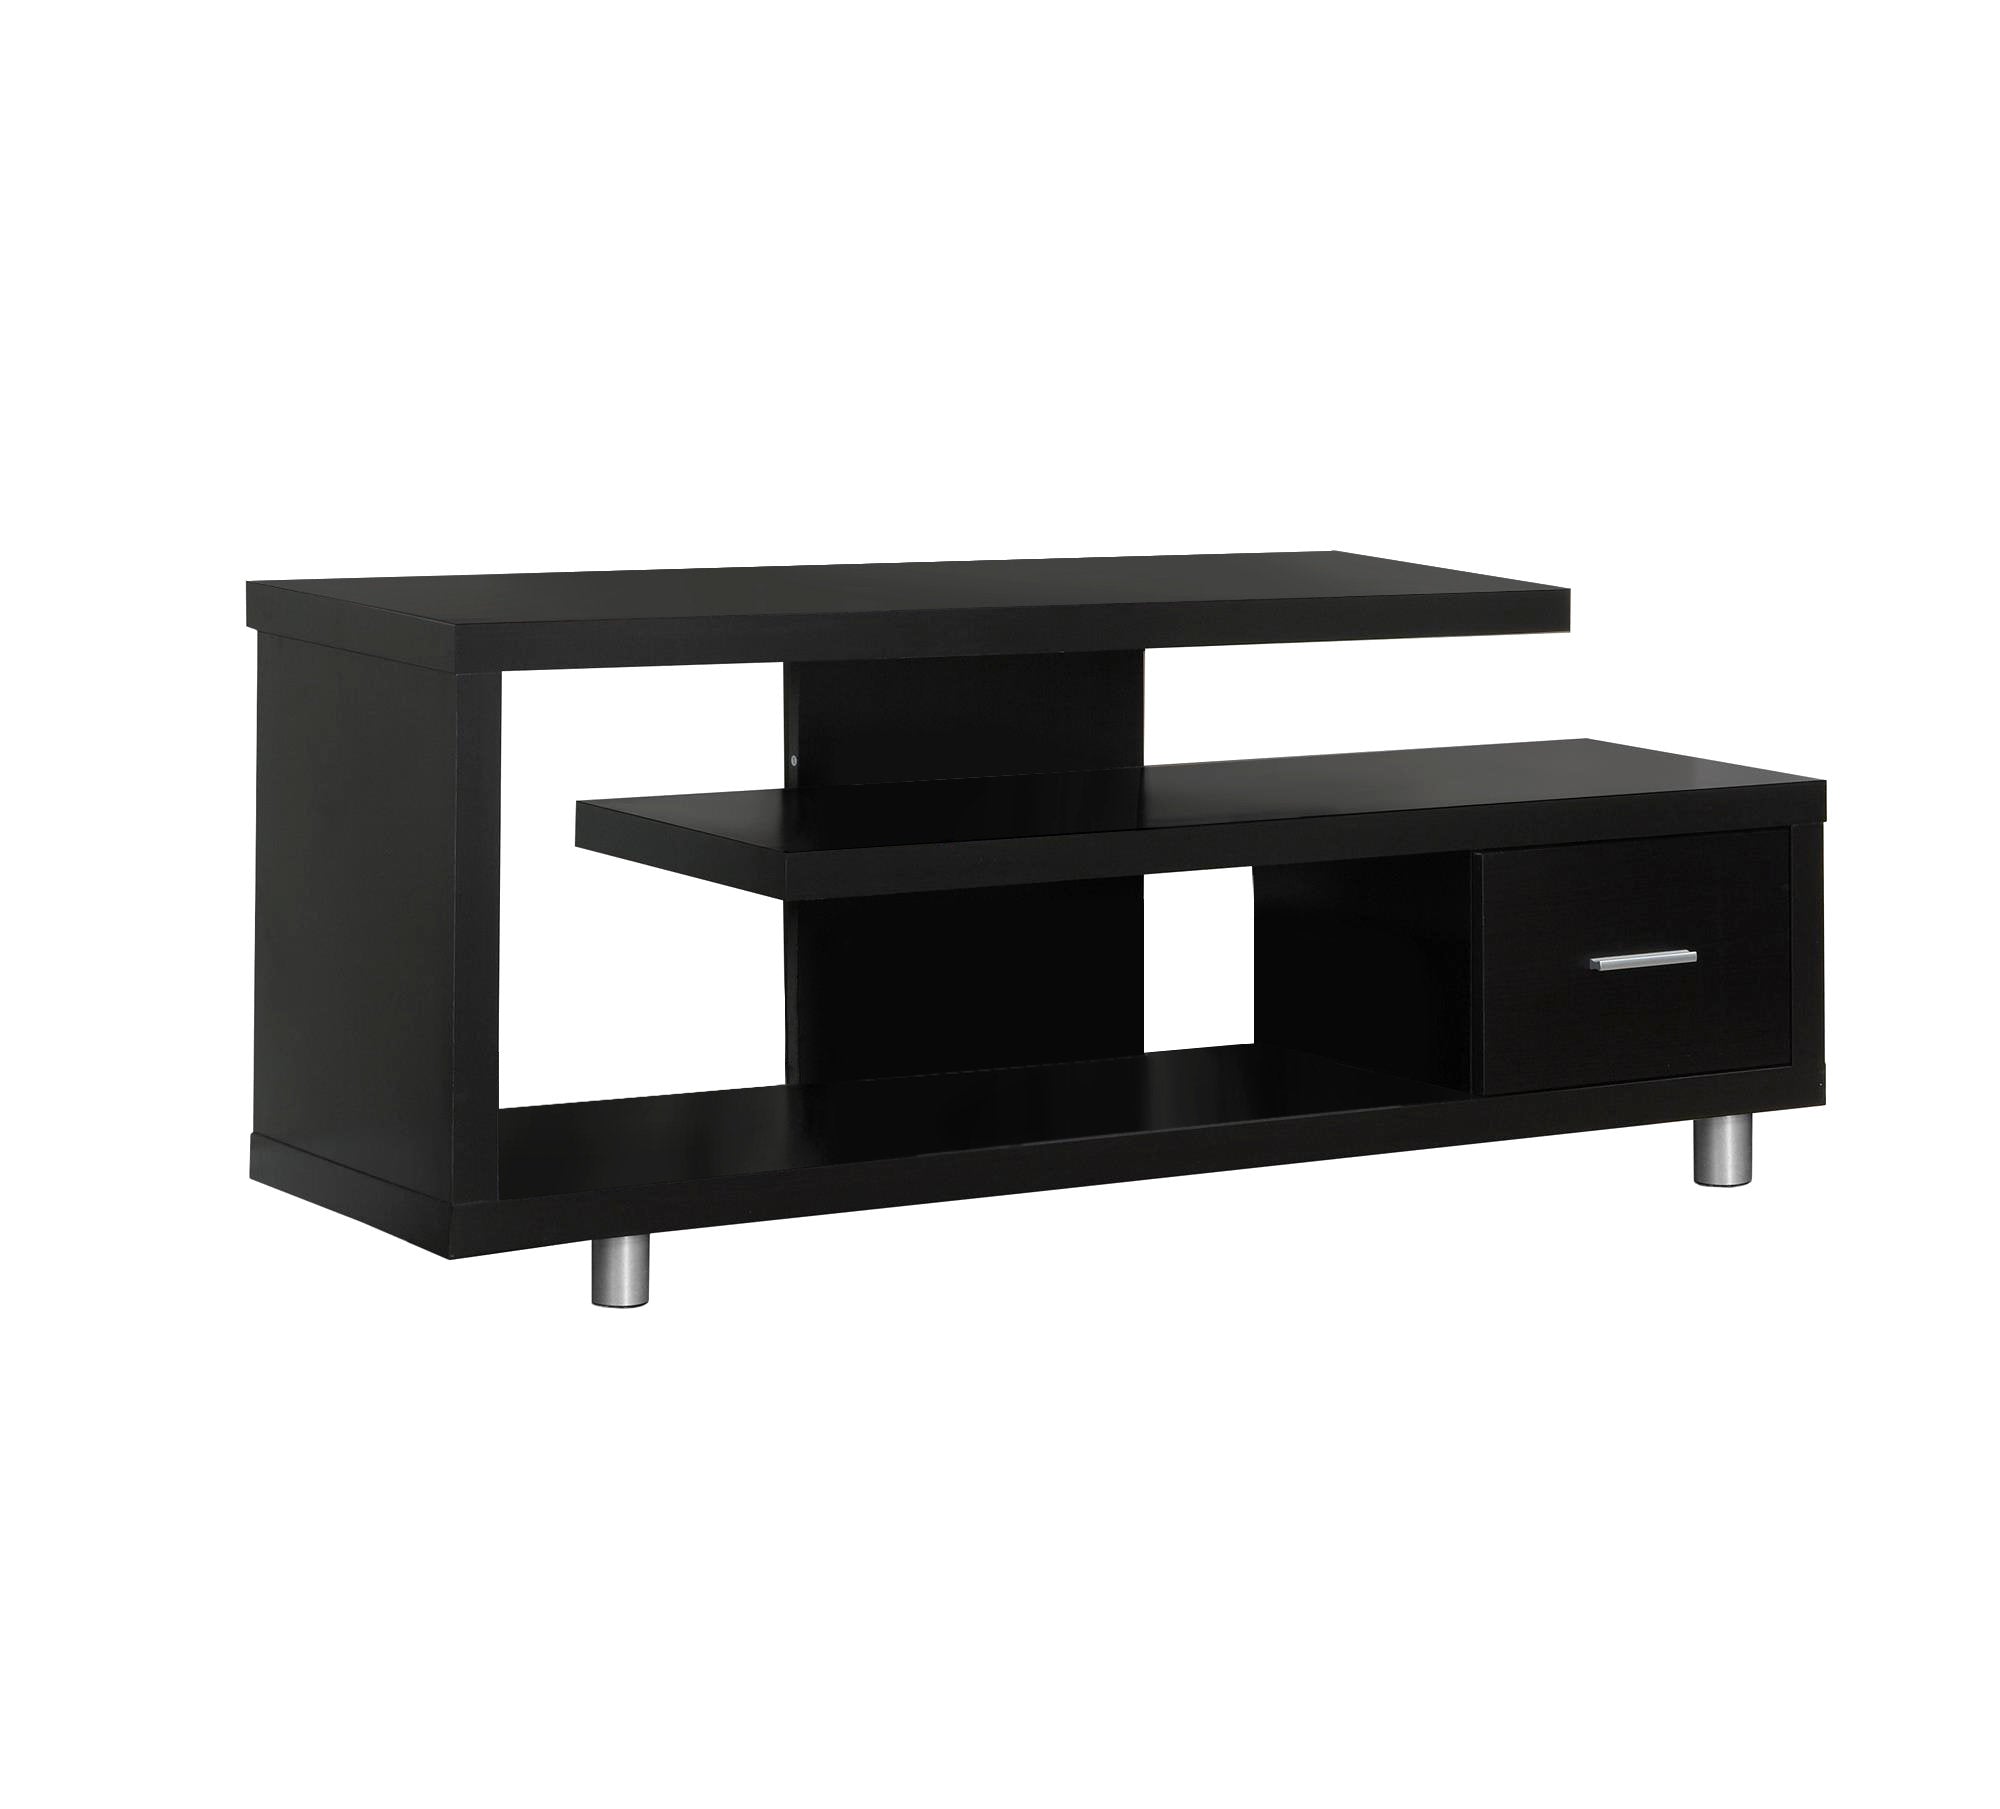 MN-672572    Tv Stand, 60 Inch, Console, Media Entertainment Center, Storage Cabinet, Living Room, Bedroom, Laminate, Metal, Dark Brown, Contemporary, Modern